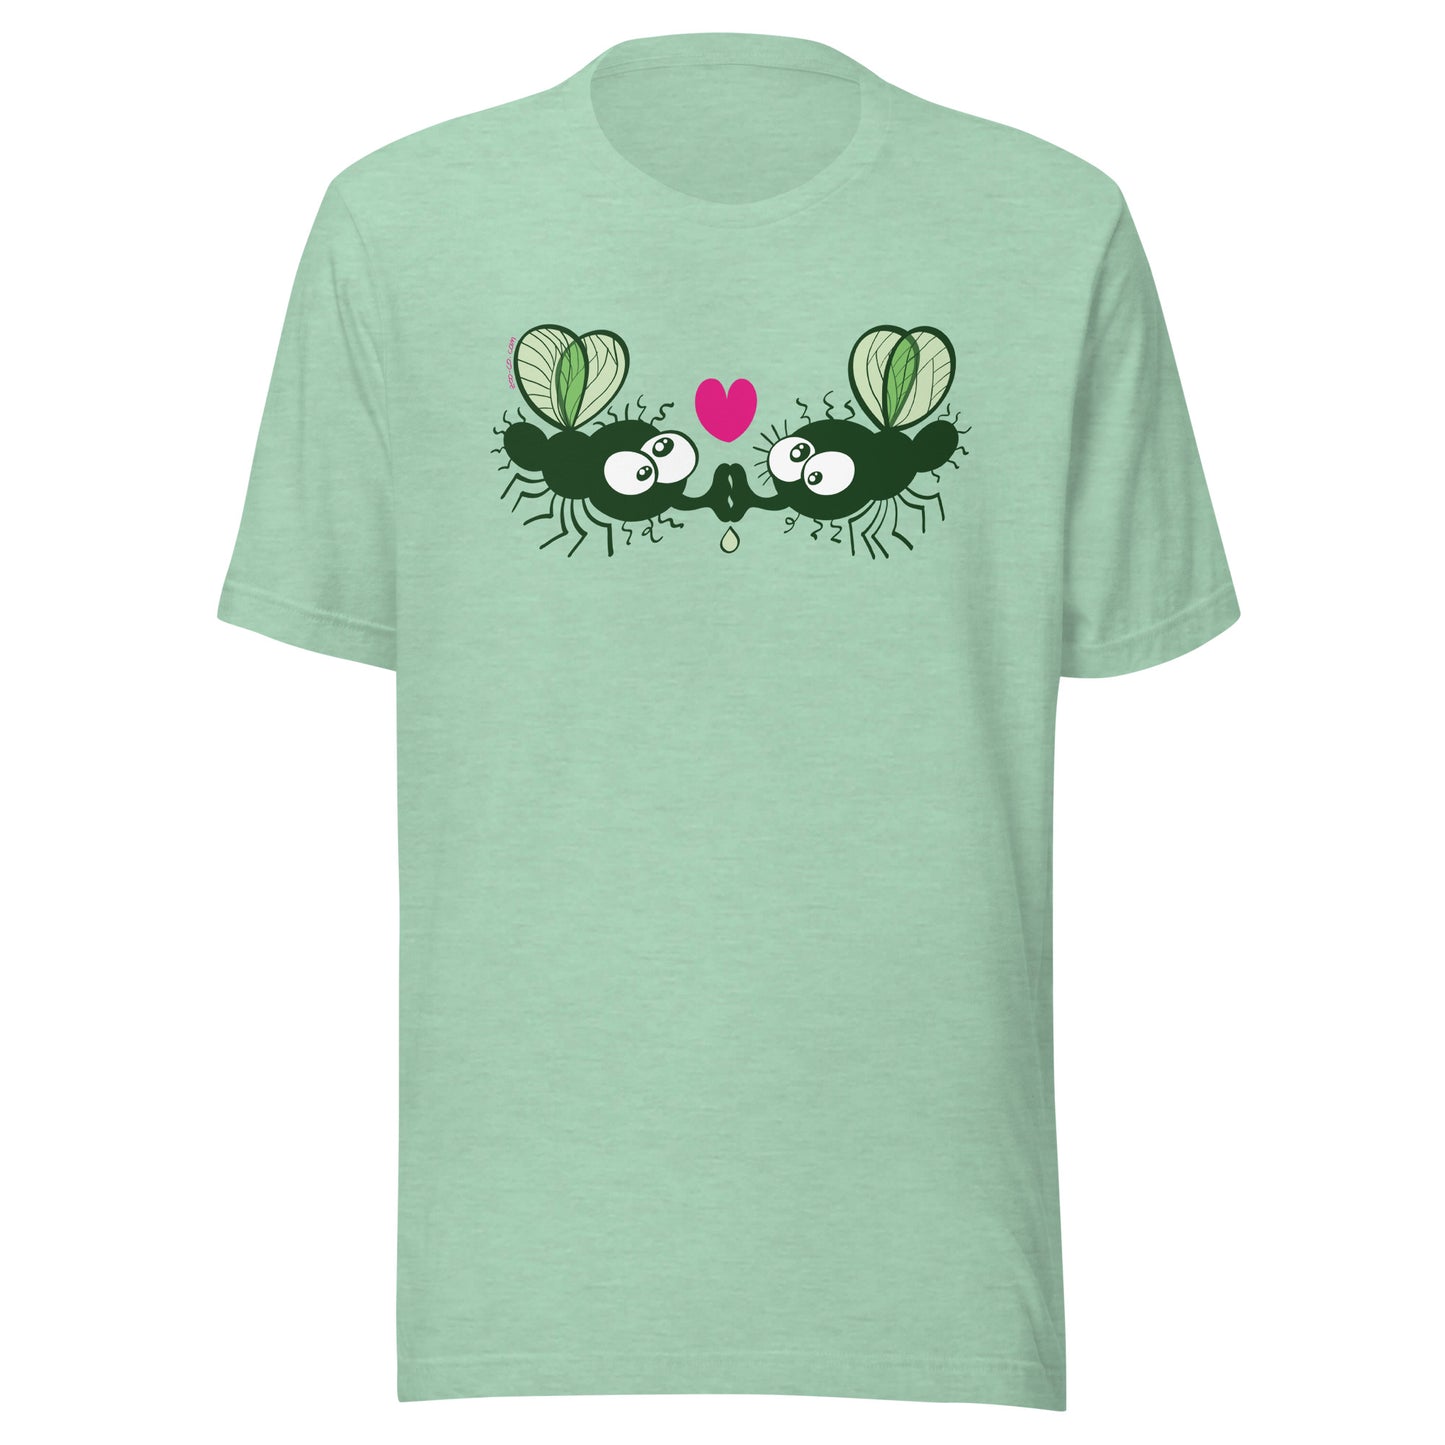 Funny houseflies kissing passionately Unisex t-shirt. Heather prism mint color. Front view